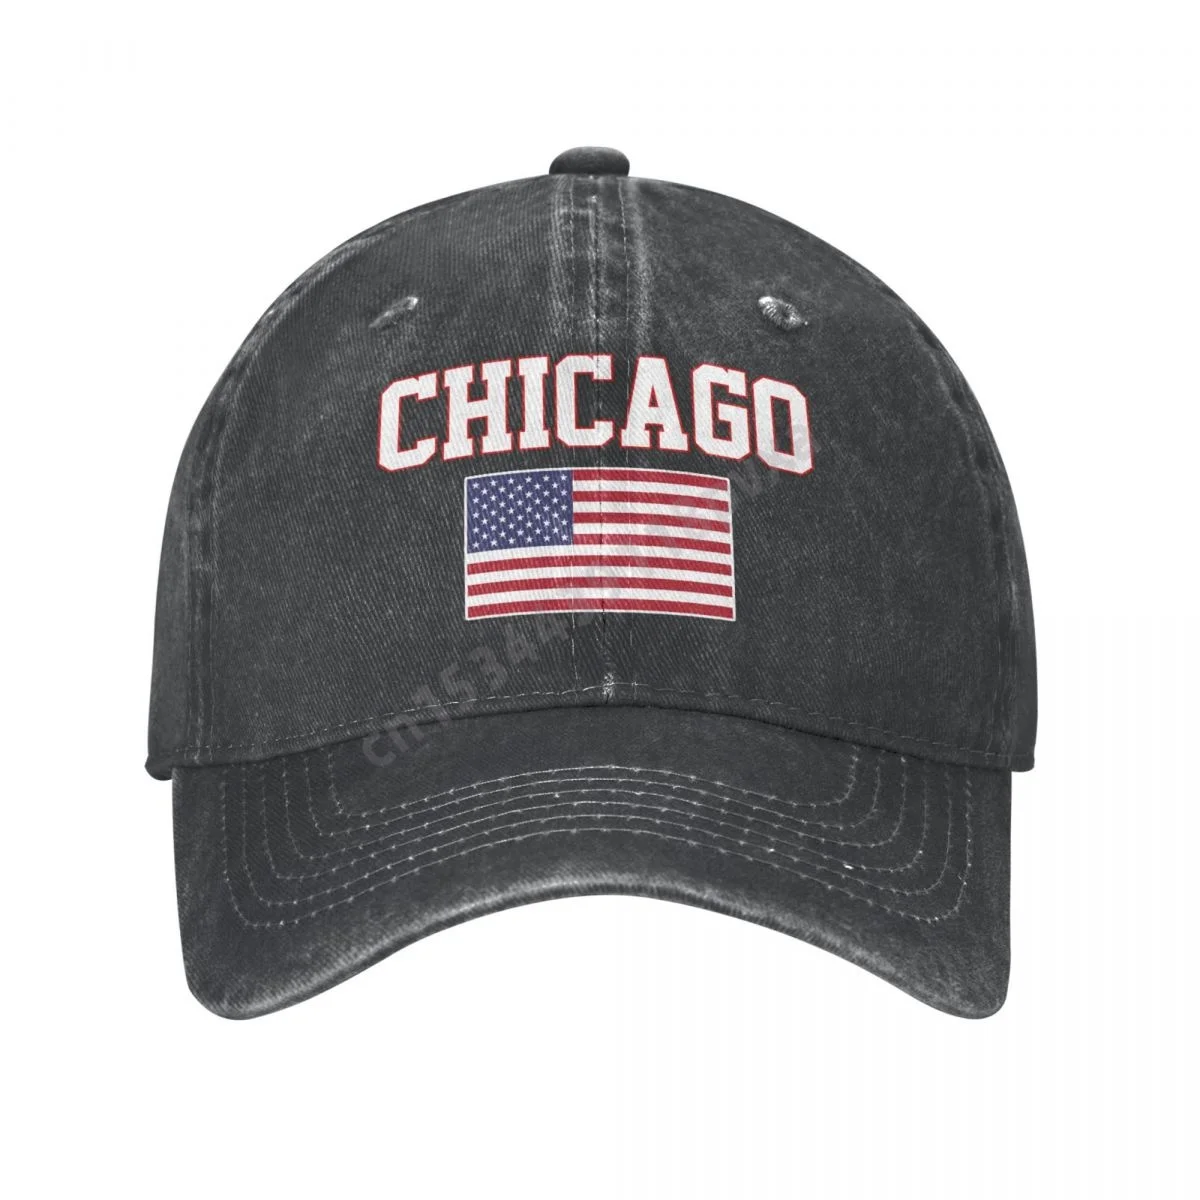 

Chicago America Flag USA United States City Charcoal Washed Denim Baseball Cap Men Classic Vintage Cotton Dad Trucker Hat